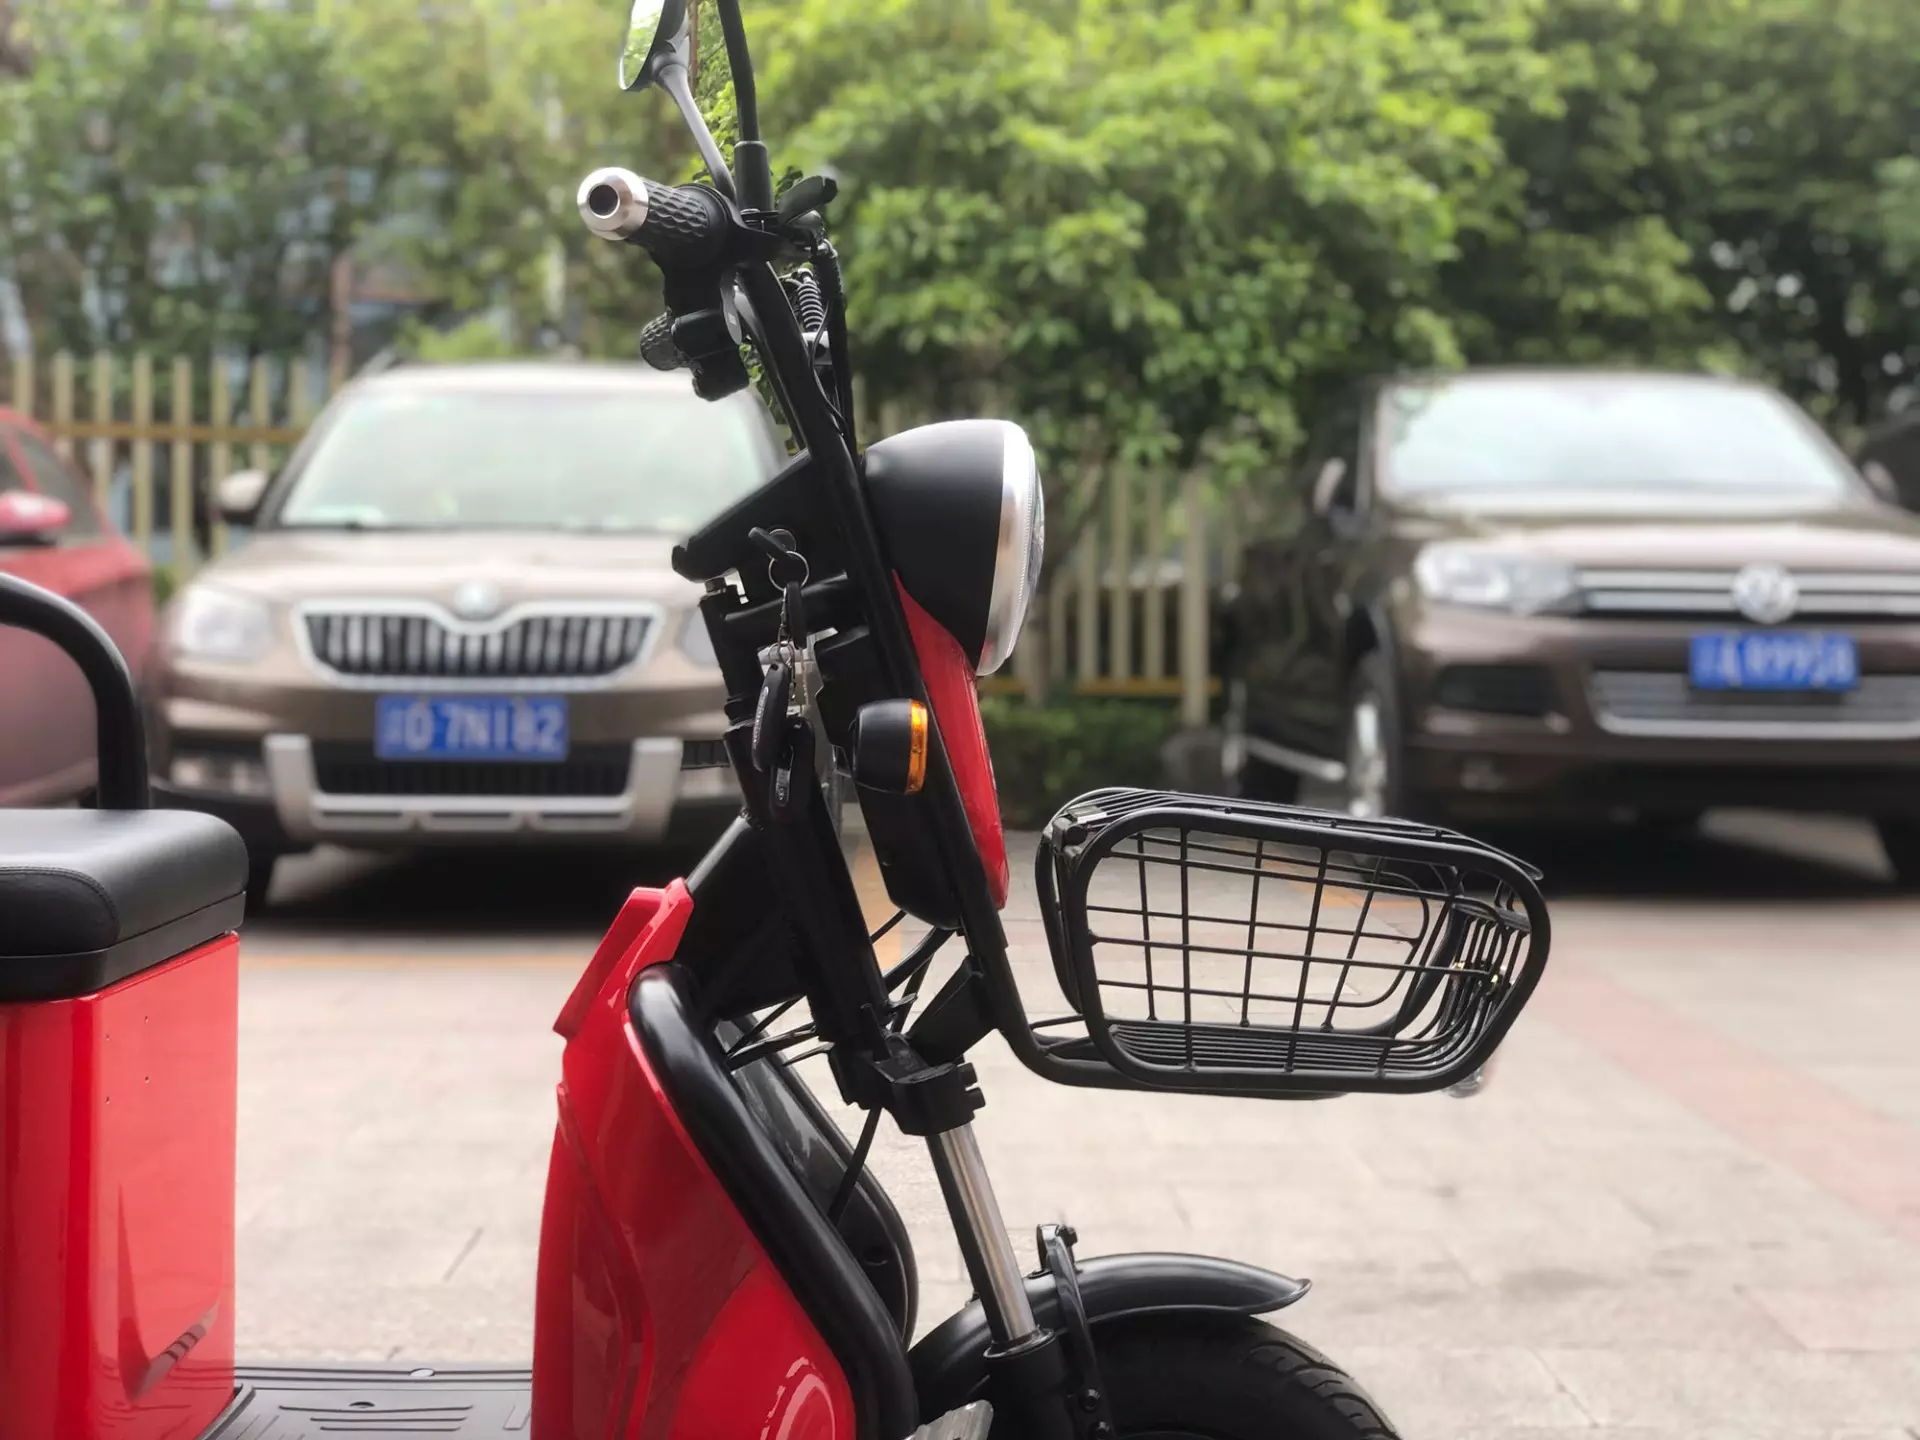 2021  DAYANG factory electric tricycle 350W differiential motor 3 wheel leisure  tricycle  for adult passenger and cargo carrier